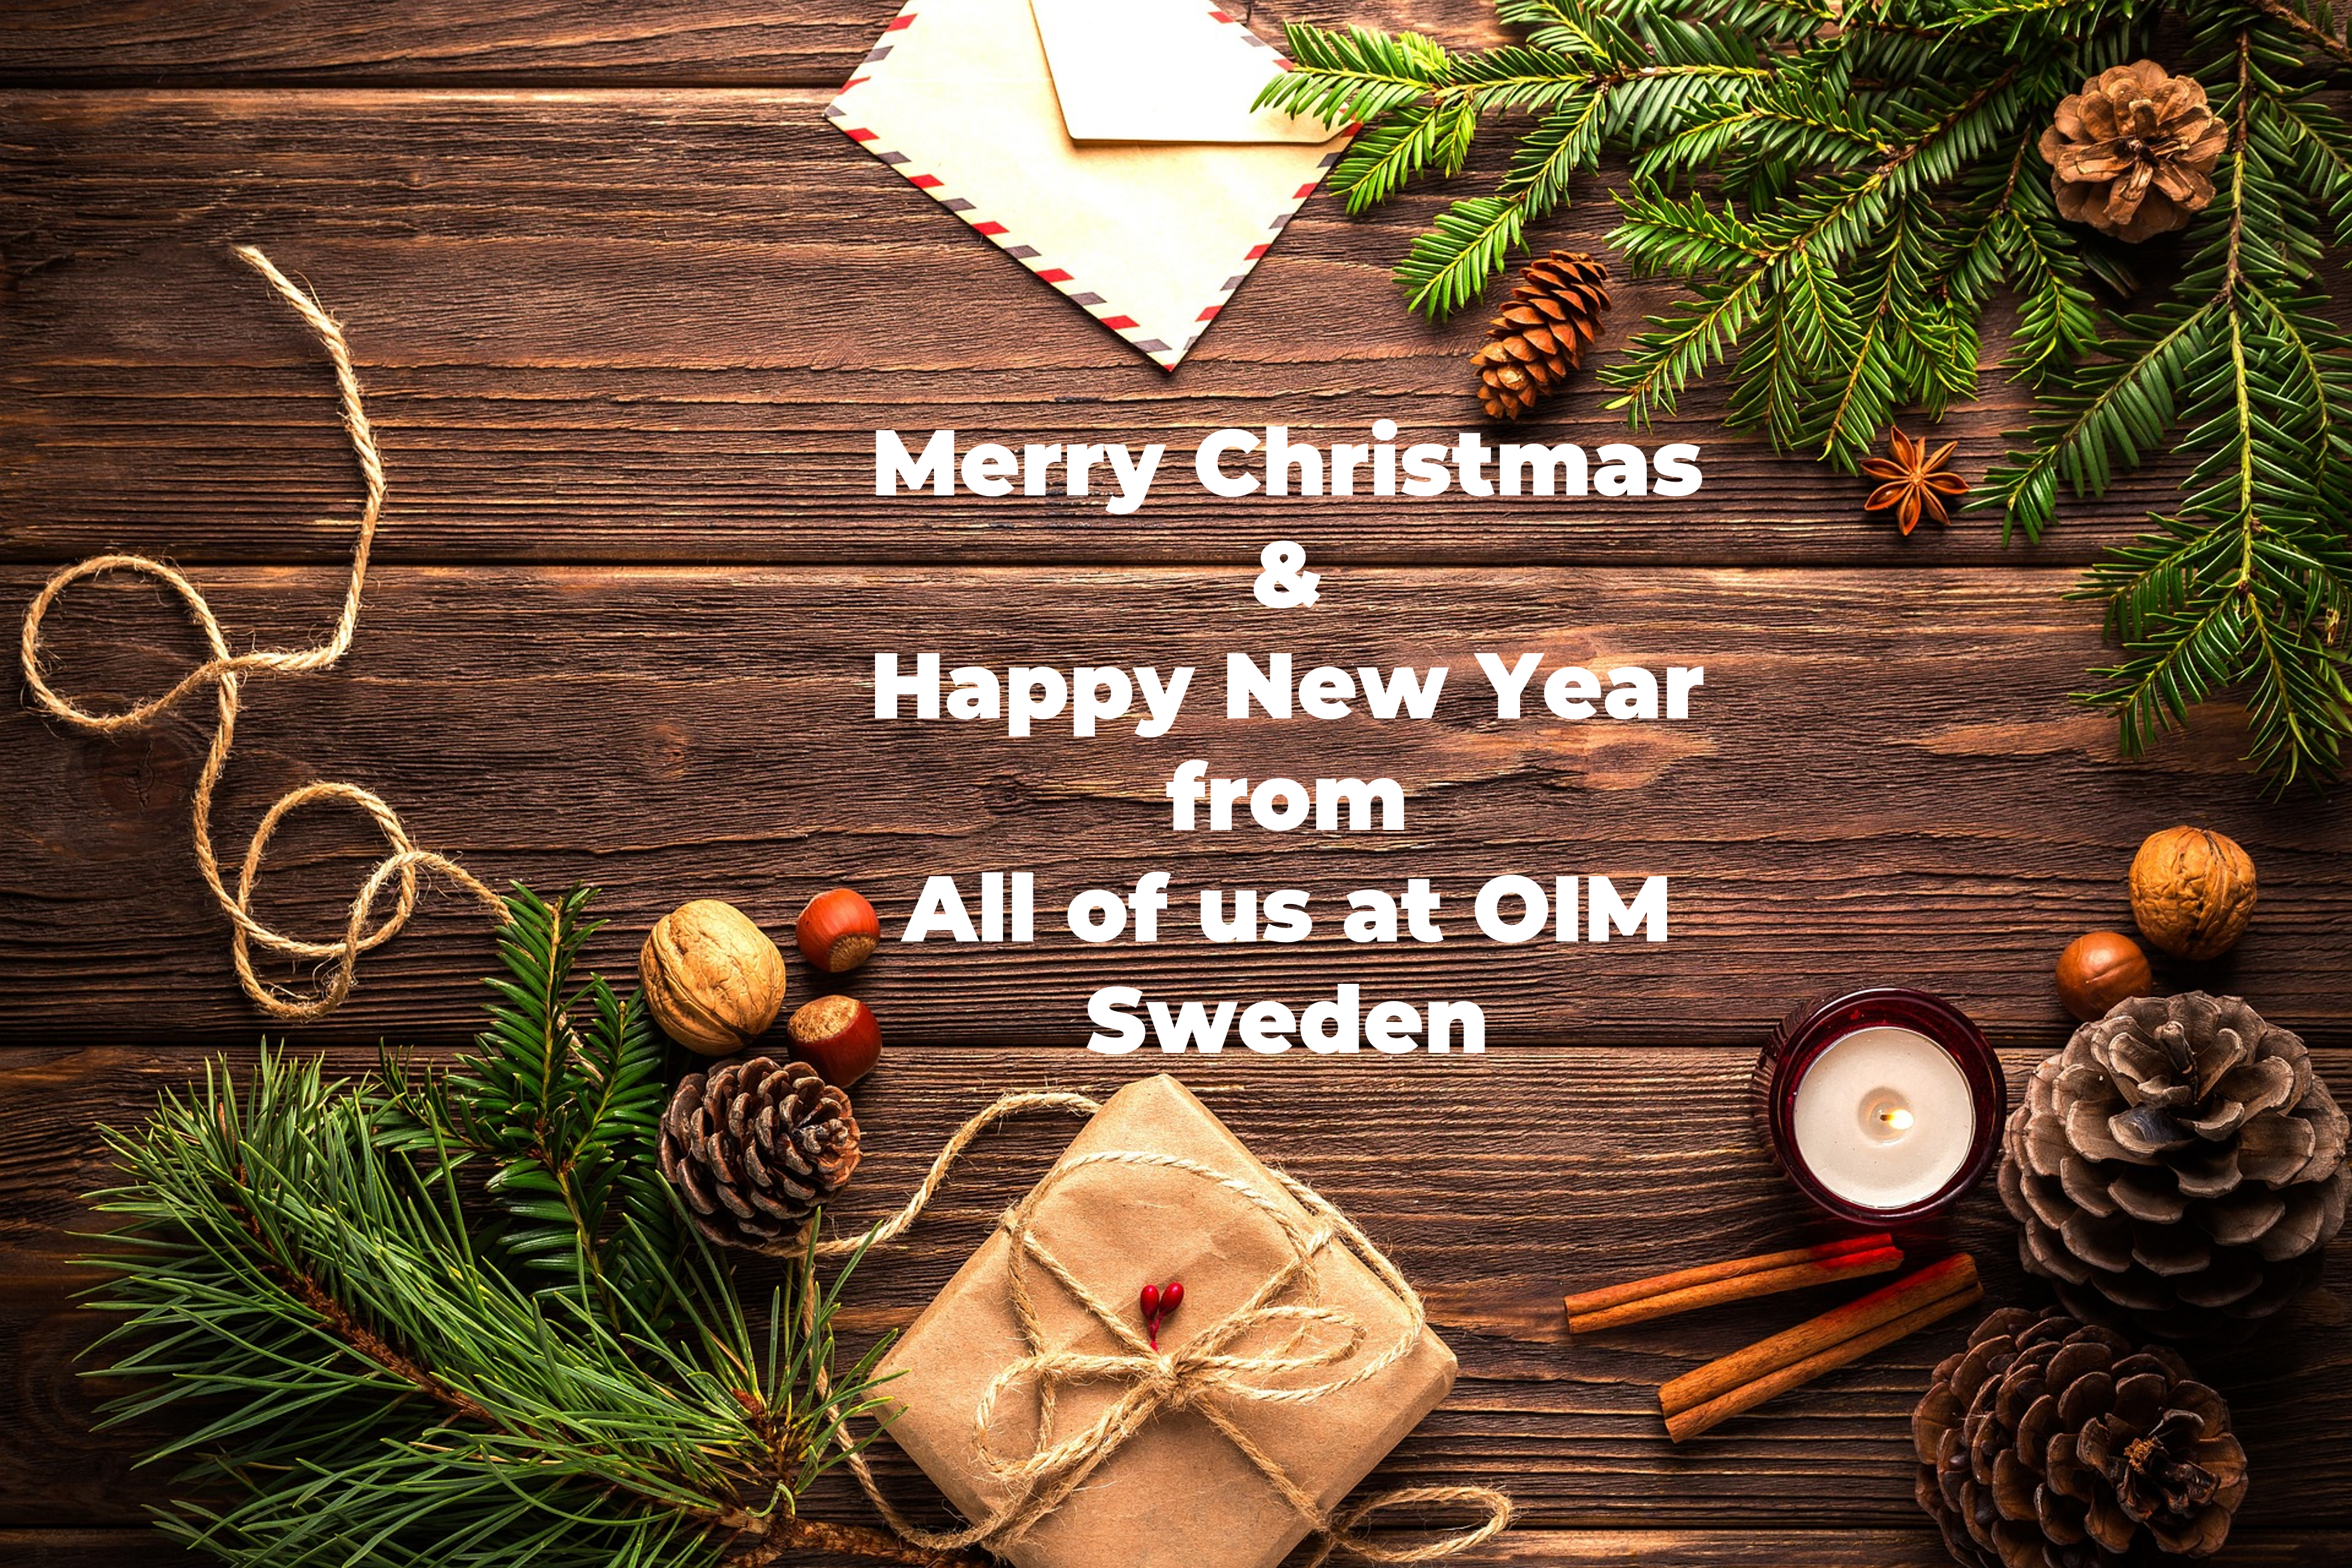 Merry Christmas and a Happy New Year from all of us at OIM Sweden